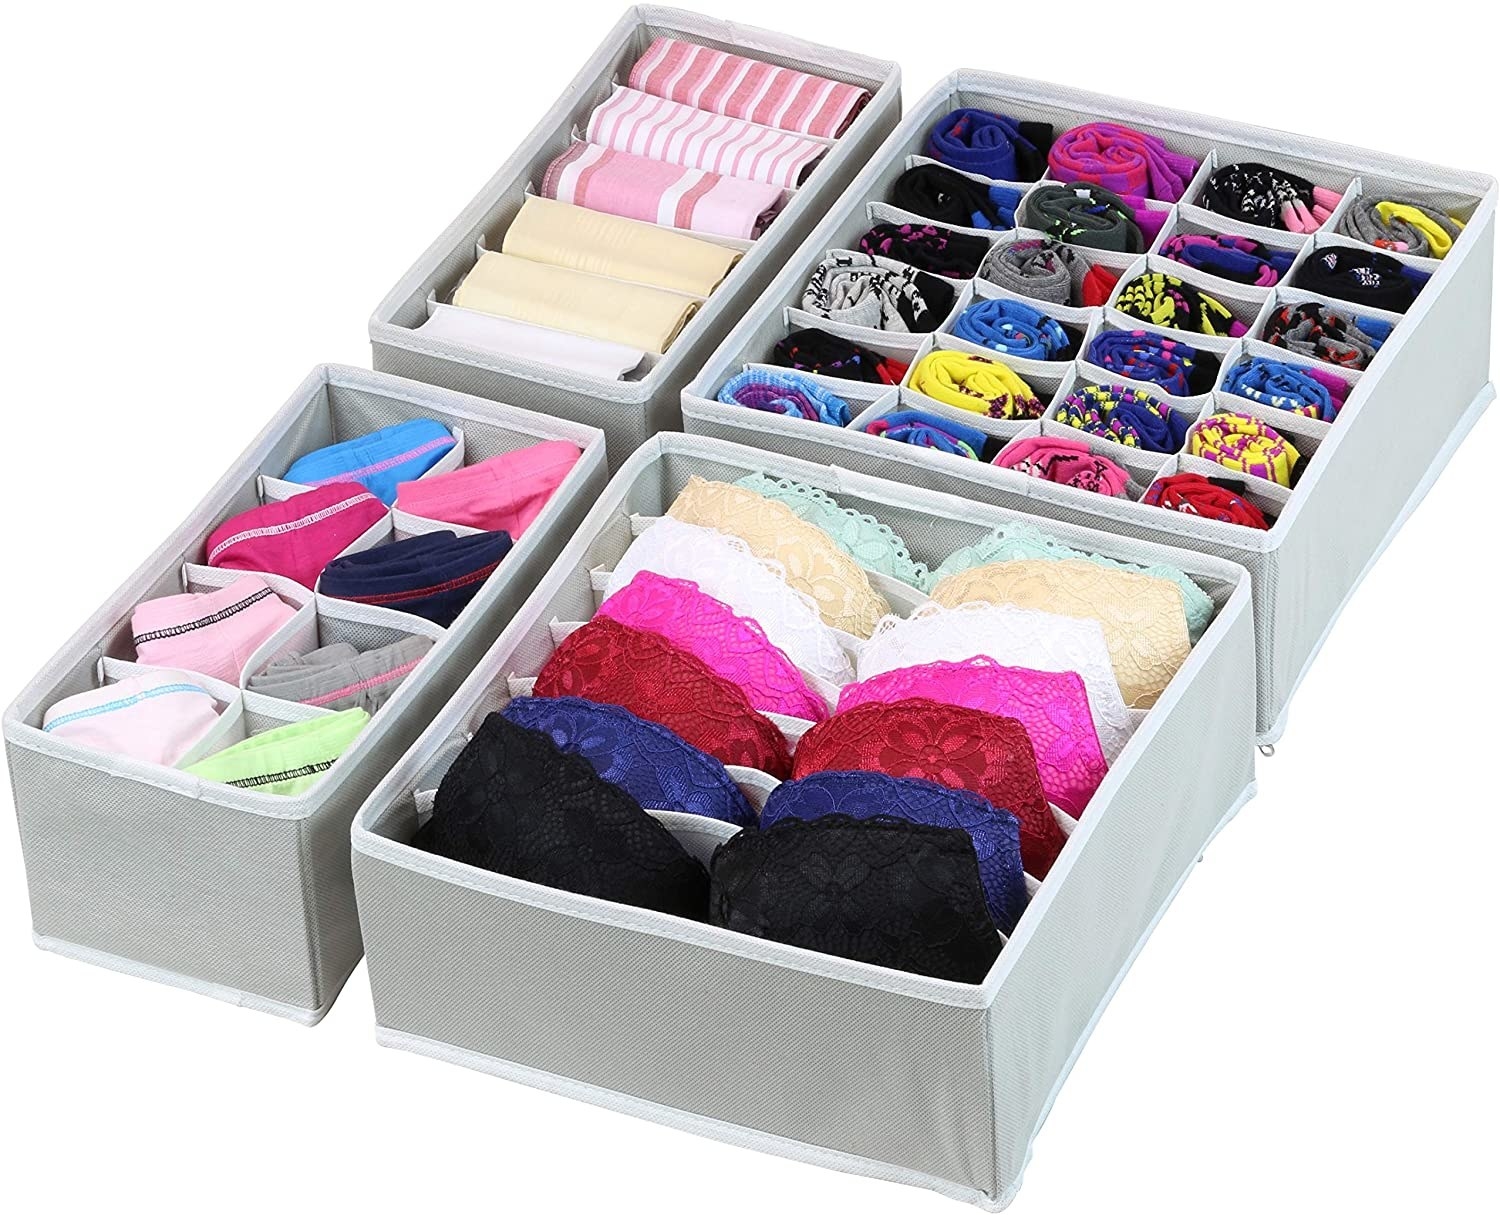 a set of four underwear organizers filled with socks, bras, boxers, and underwear